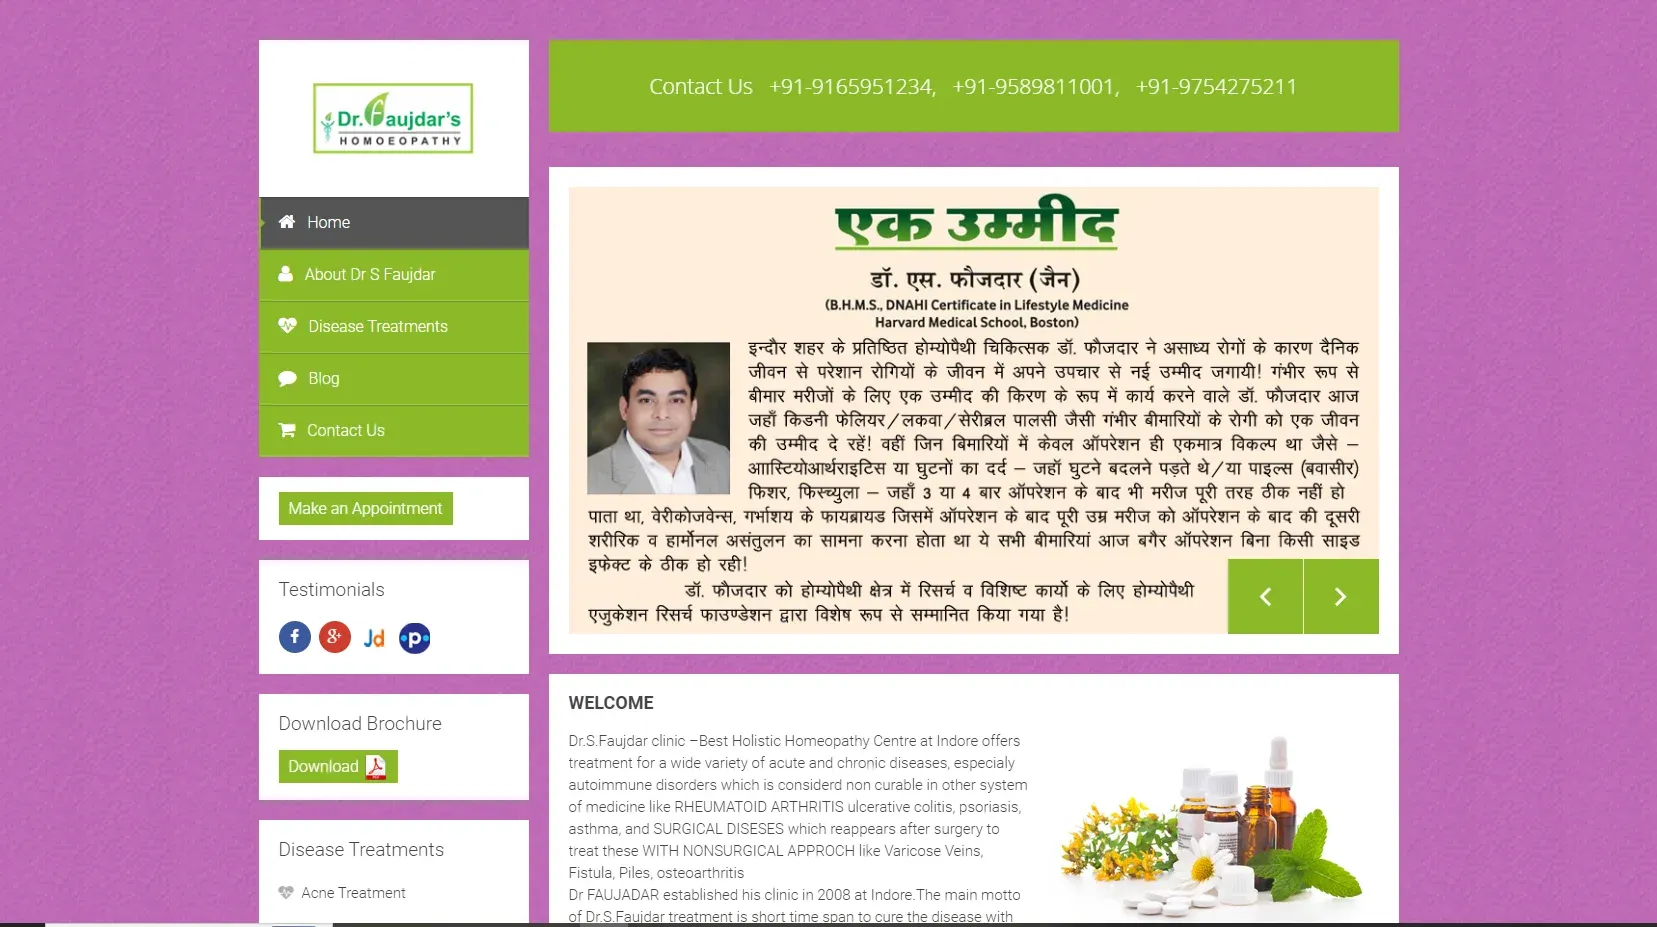 Dr. Faujdar Homeopathy, Indore